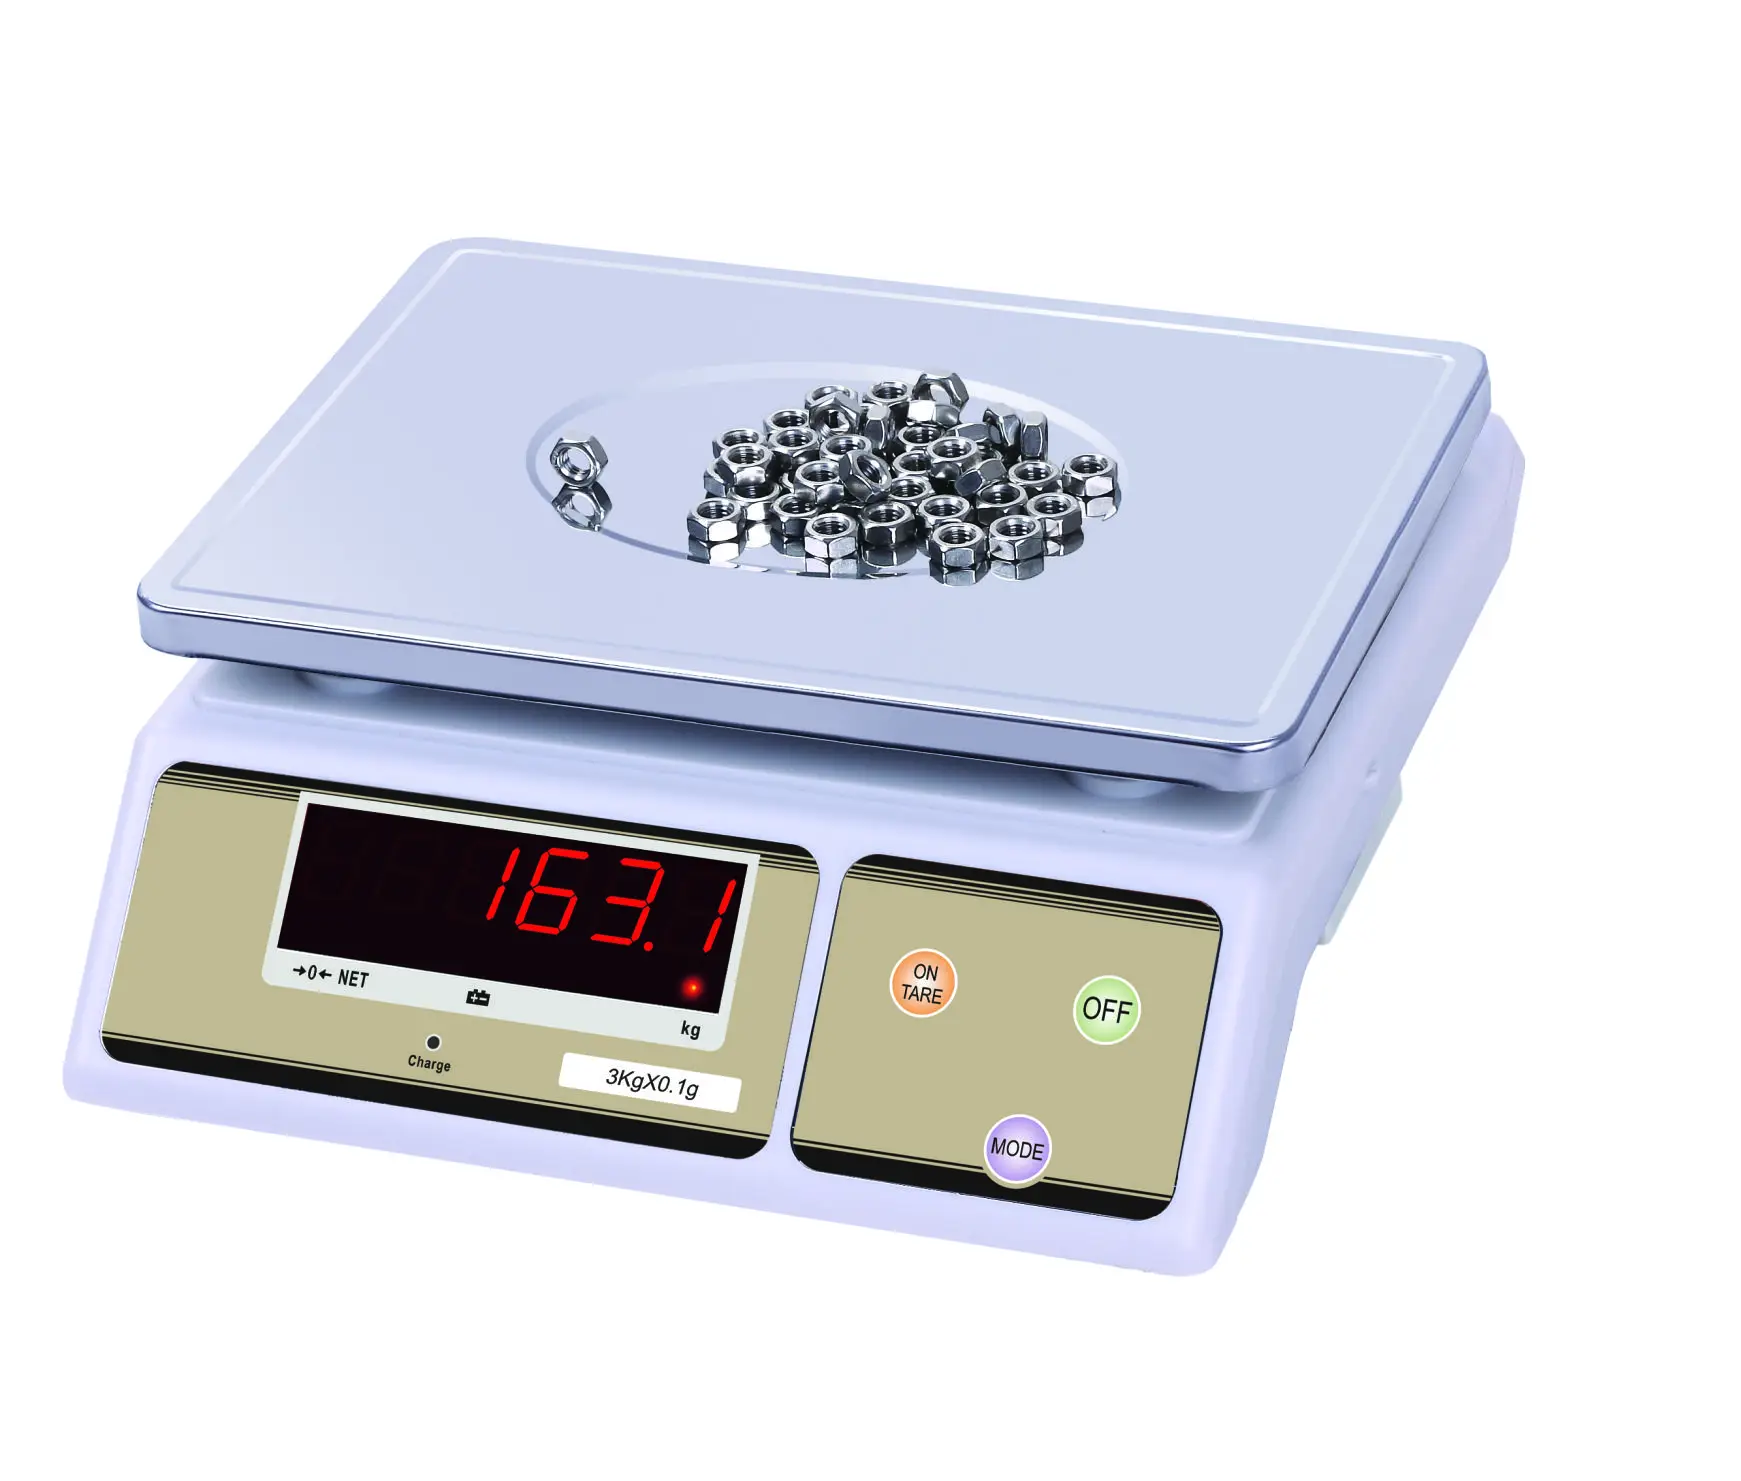 Digital Weighing  Scale kitchen scale3Kg 0.1g 6Kg0.2g 15Kg0.5g 30kg1gFood Scales Digital Weight Gram and Oz Scale with LCD/ Tare electronic coffee scale with timer waterproof smart digital coffee weighing scale kitchen scale led drip coffee scales 3kg 0 1g